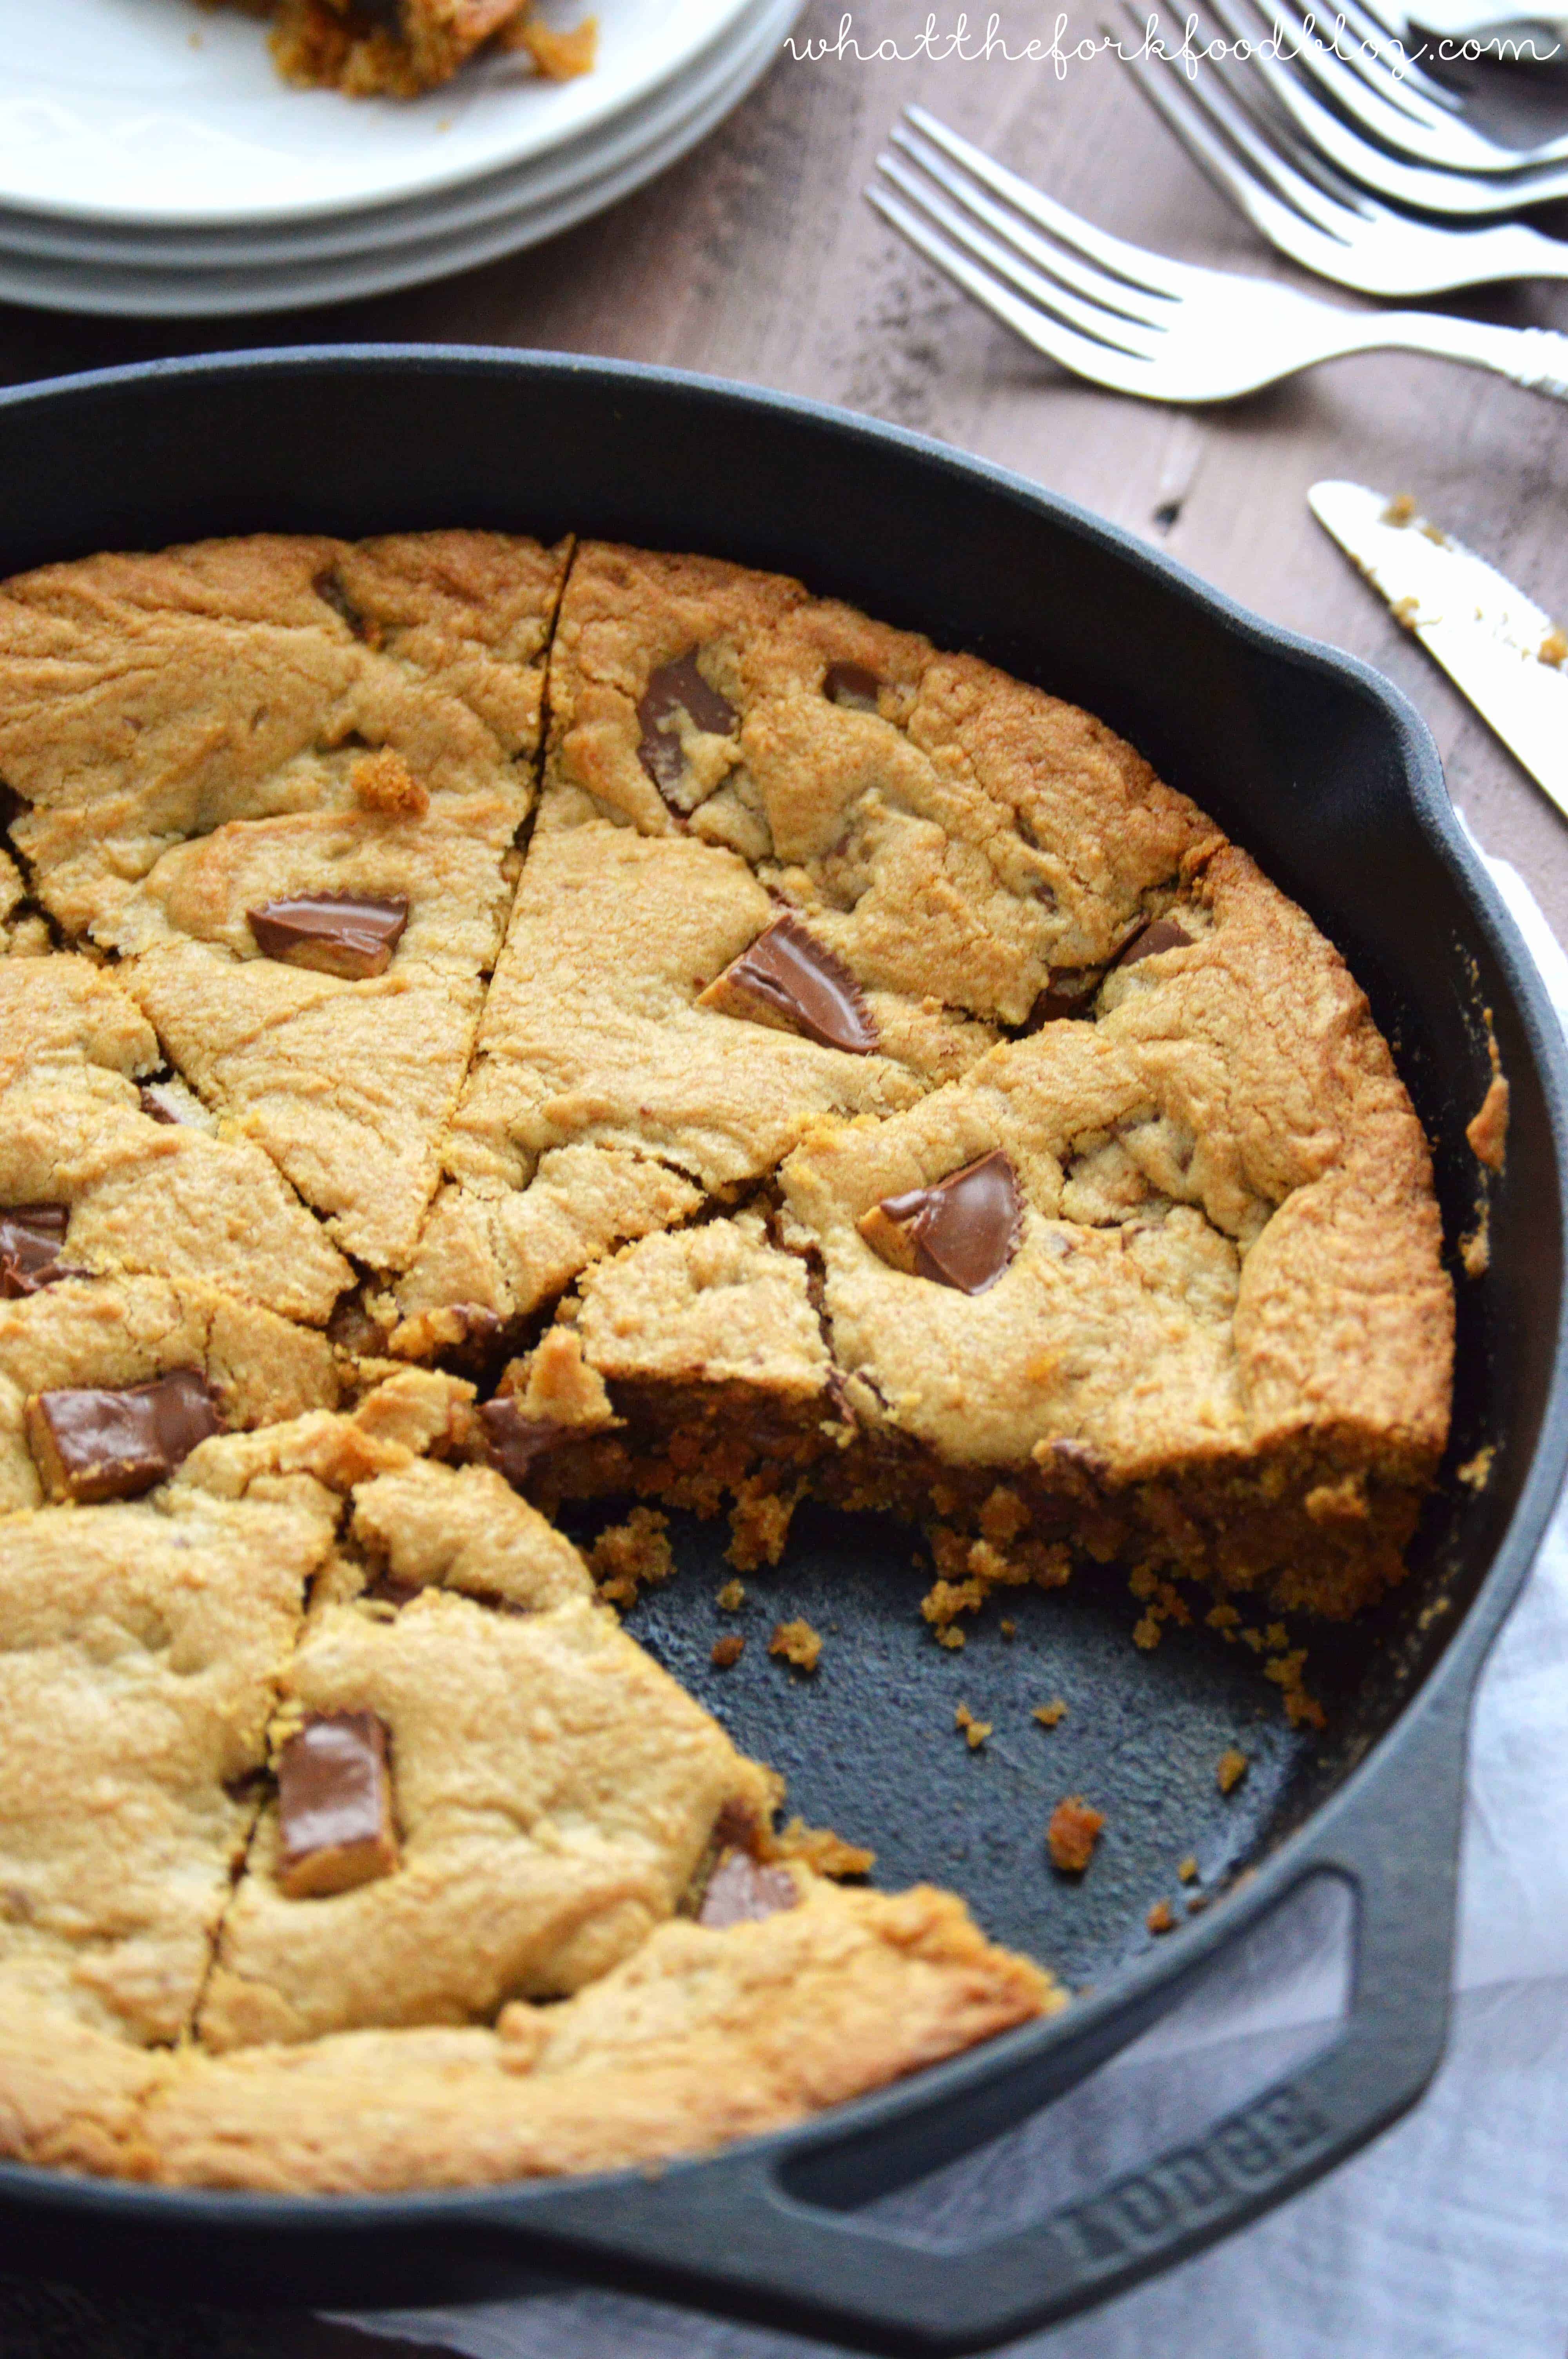 Peanut Butter Cup Cookie Pie from What The Fork Food Blog